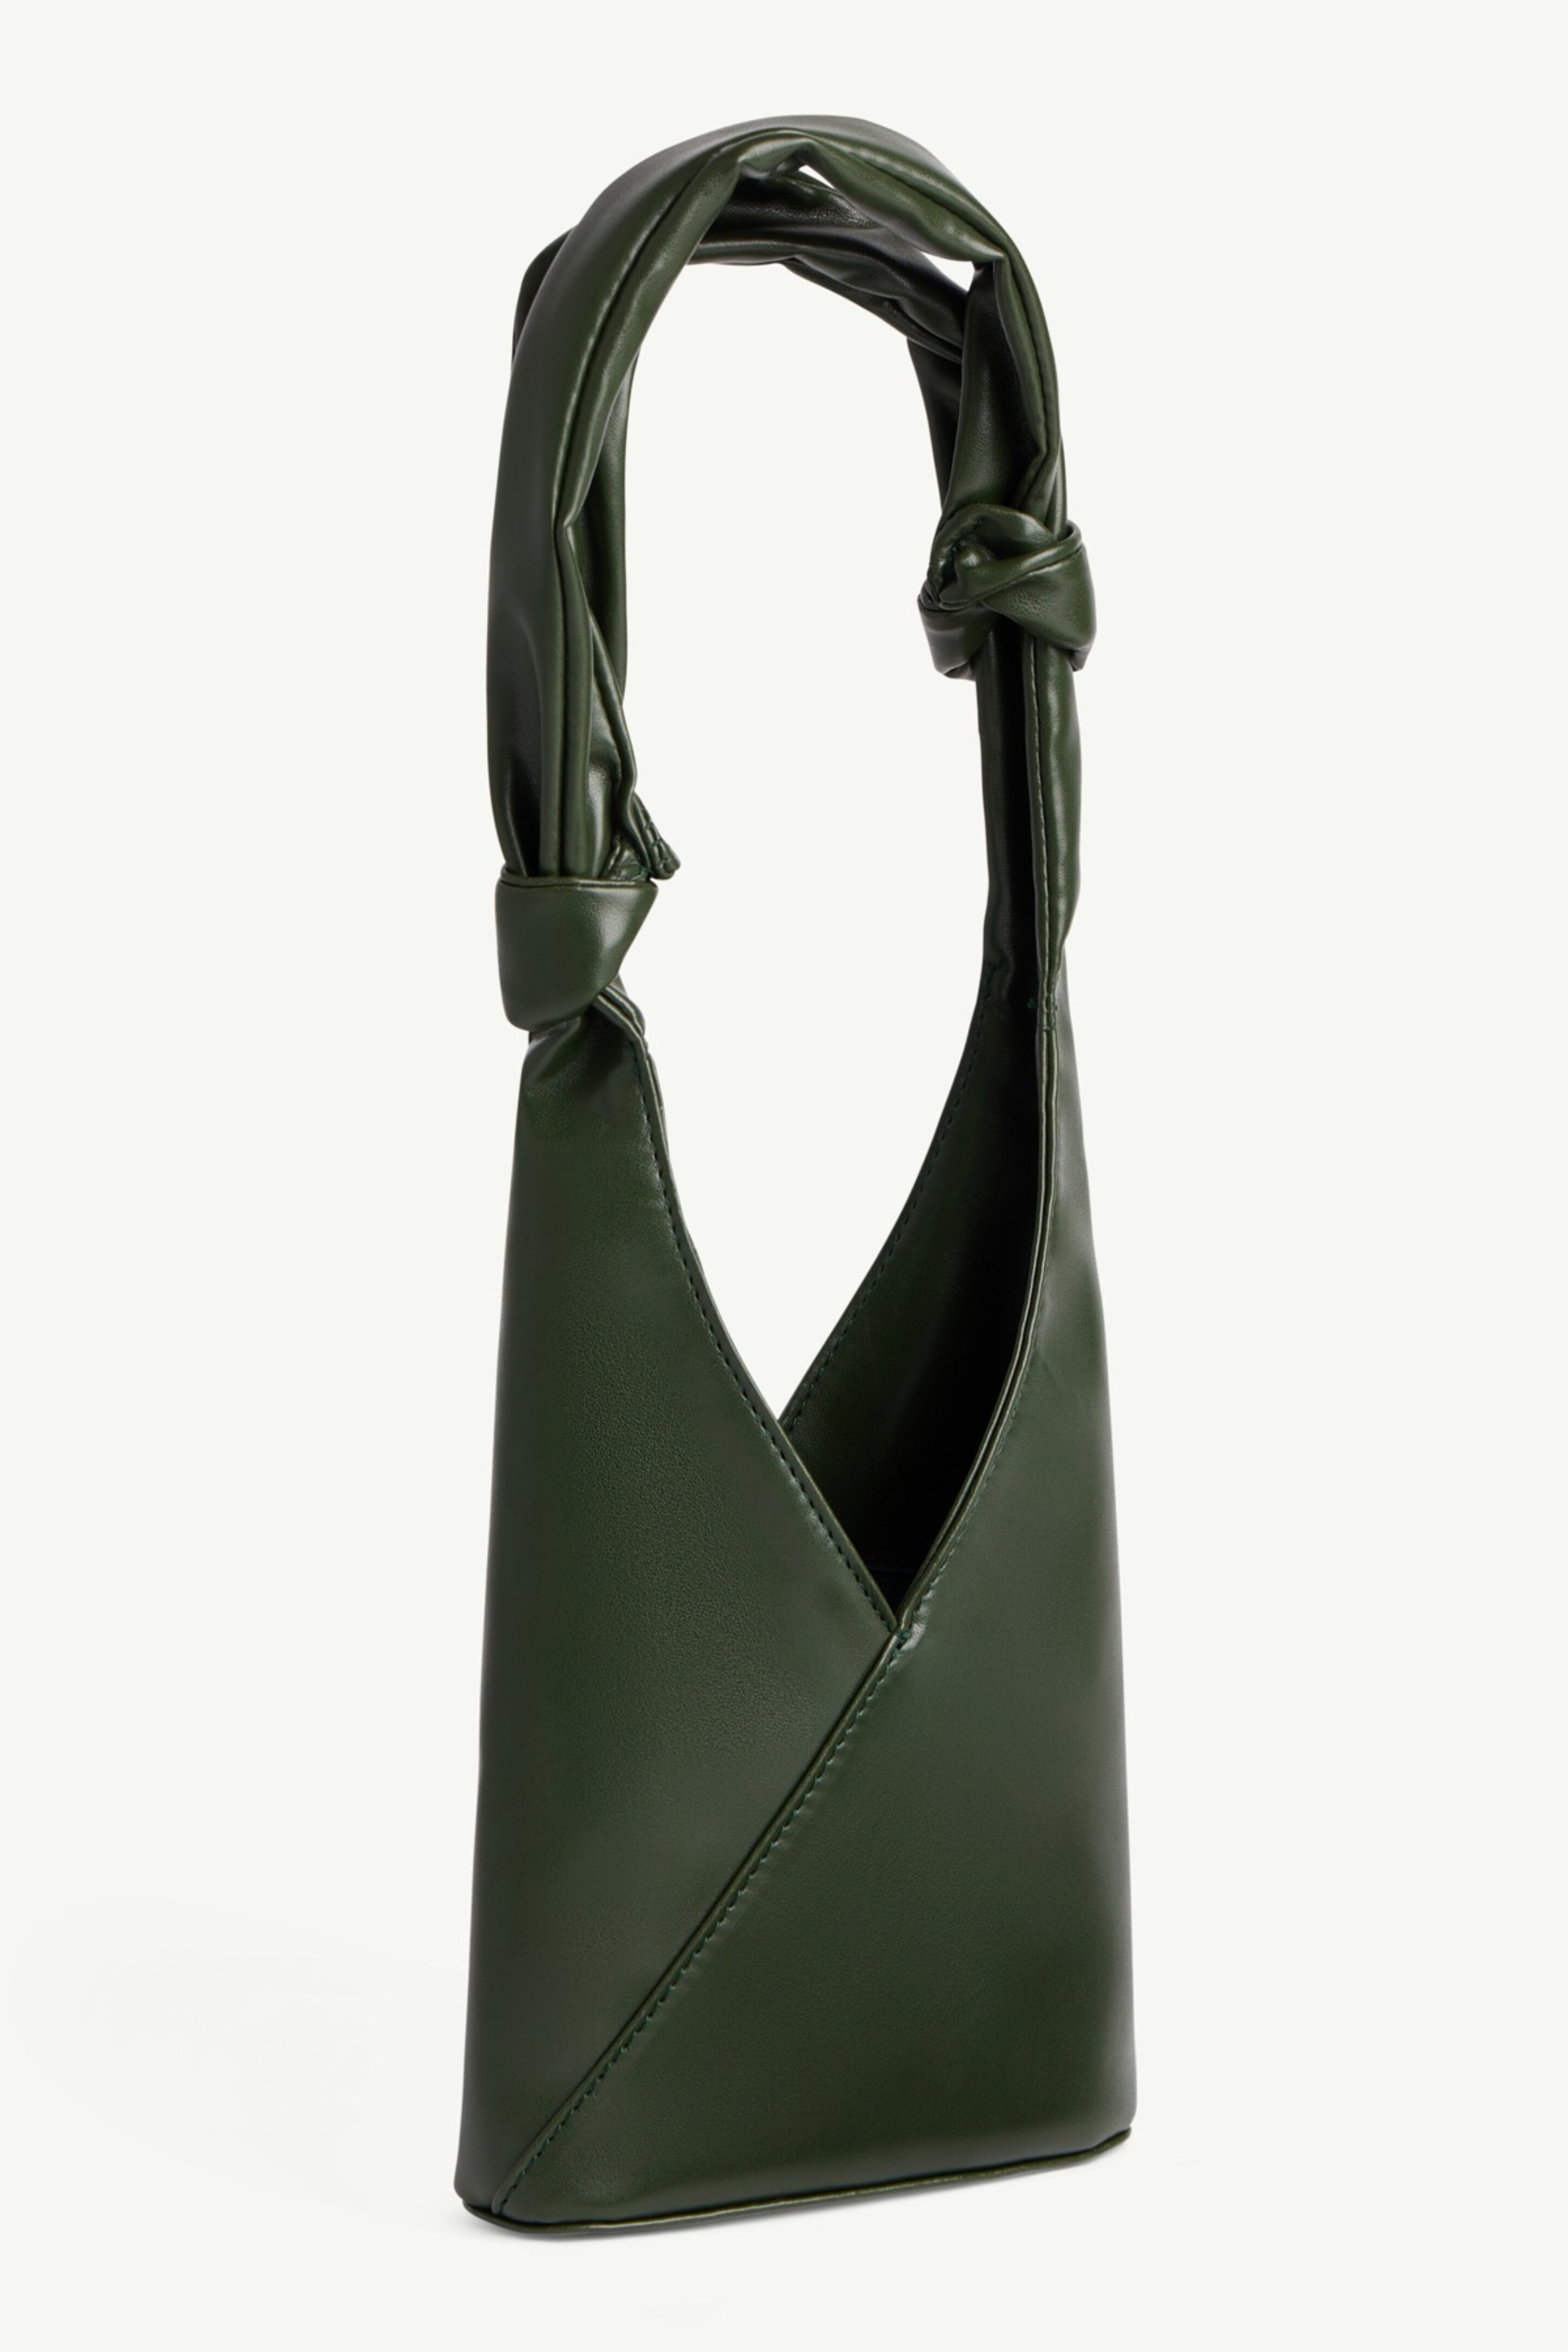 Japanese knotted bag - 3